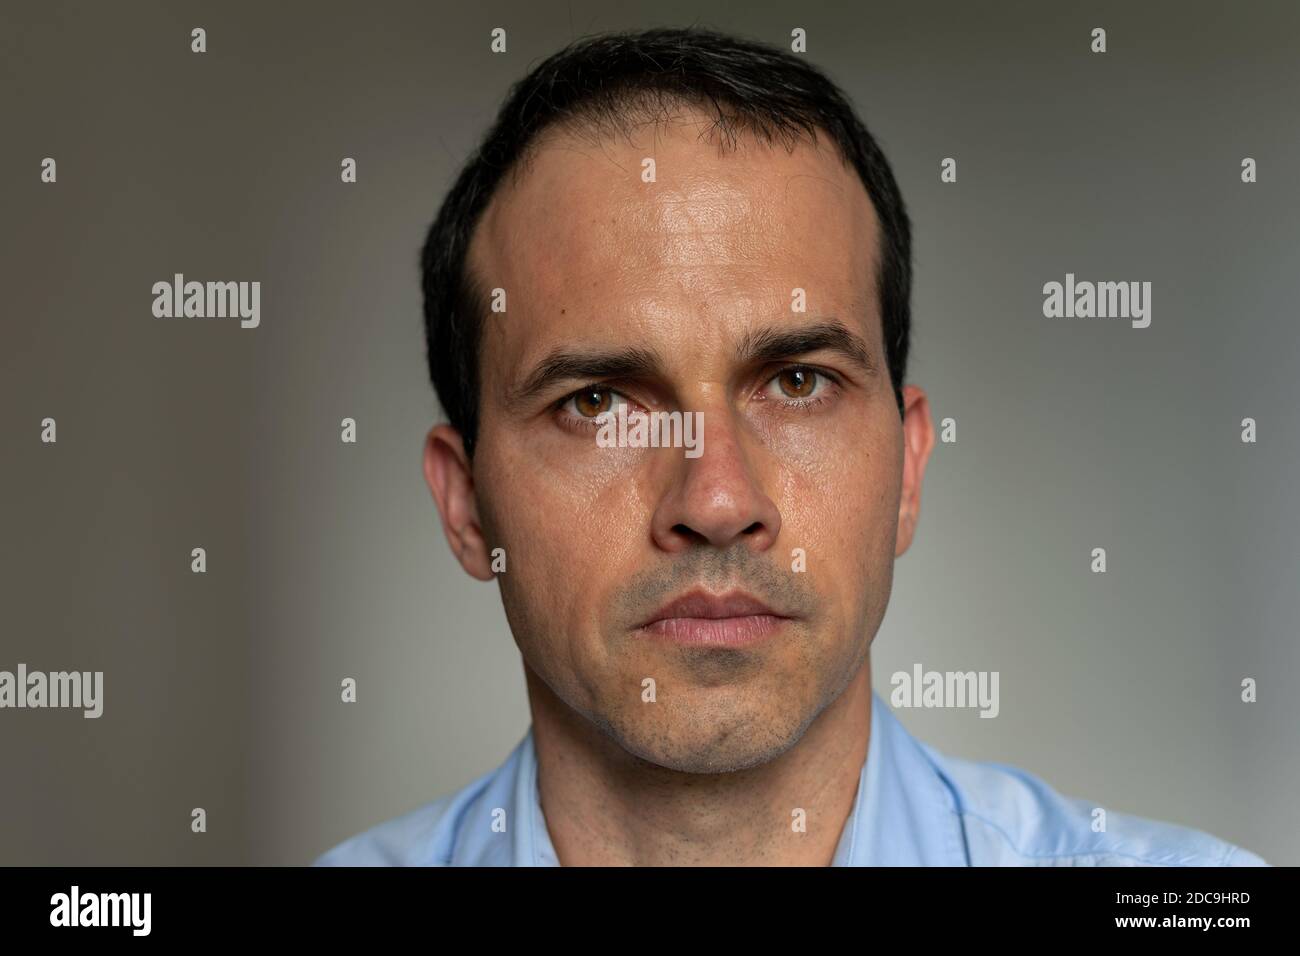 43-year-old man with a serious face. Stock Photo